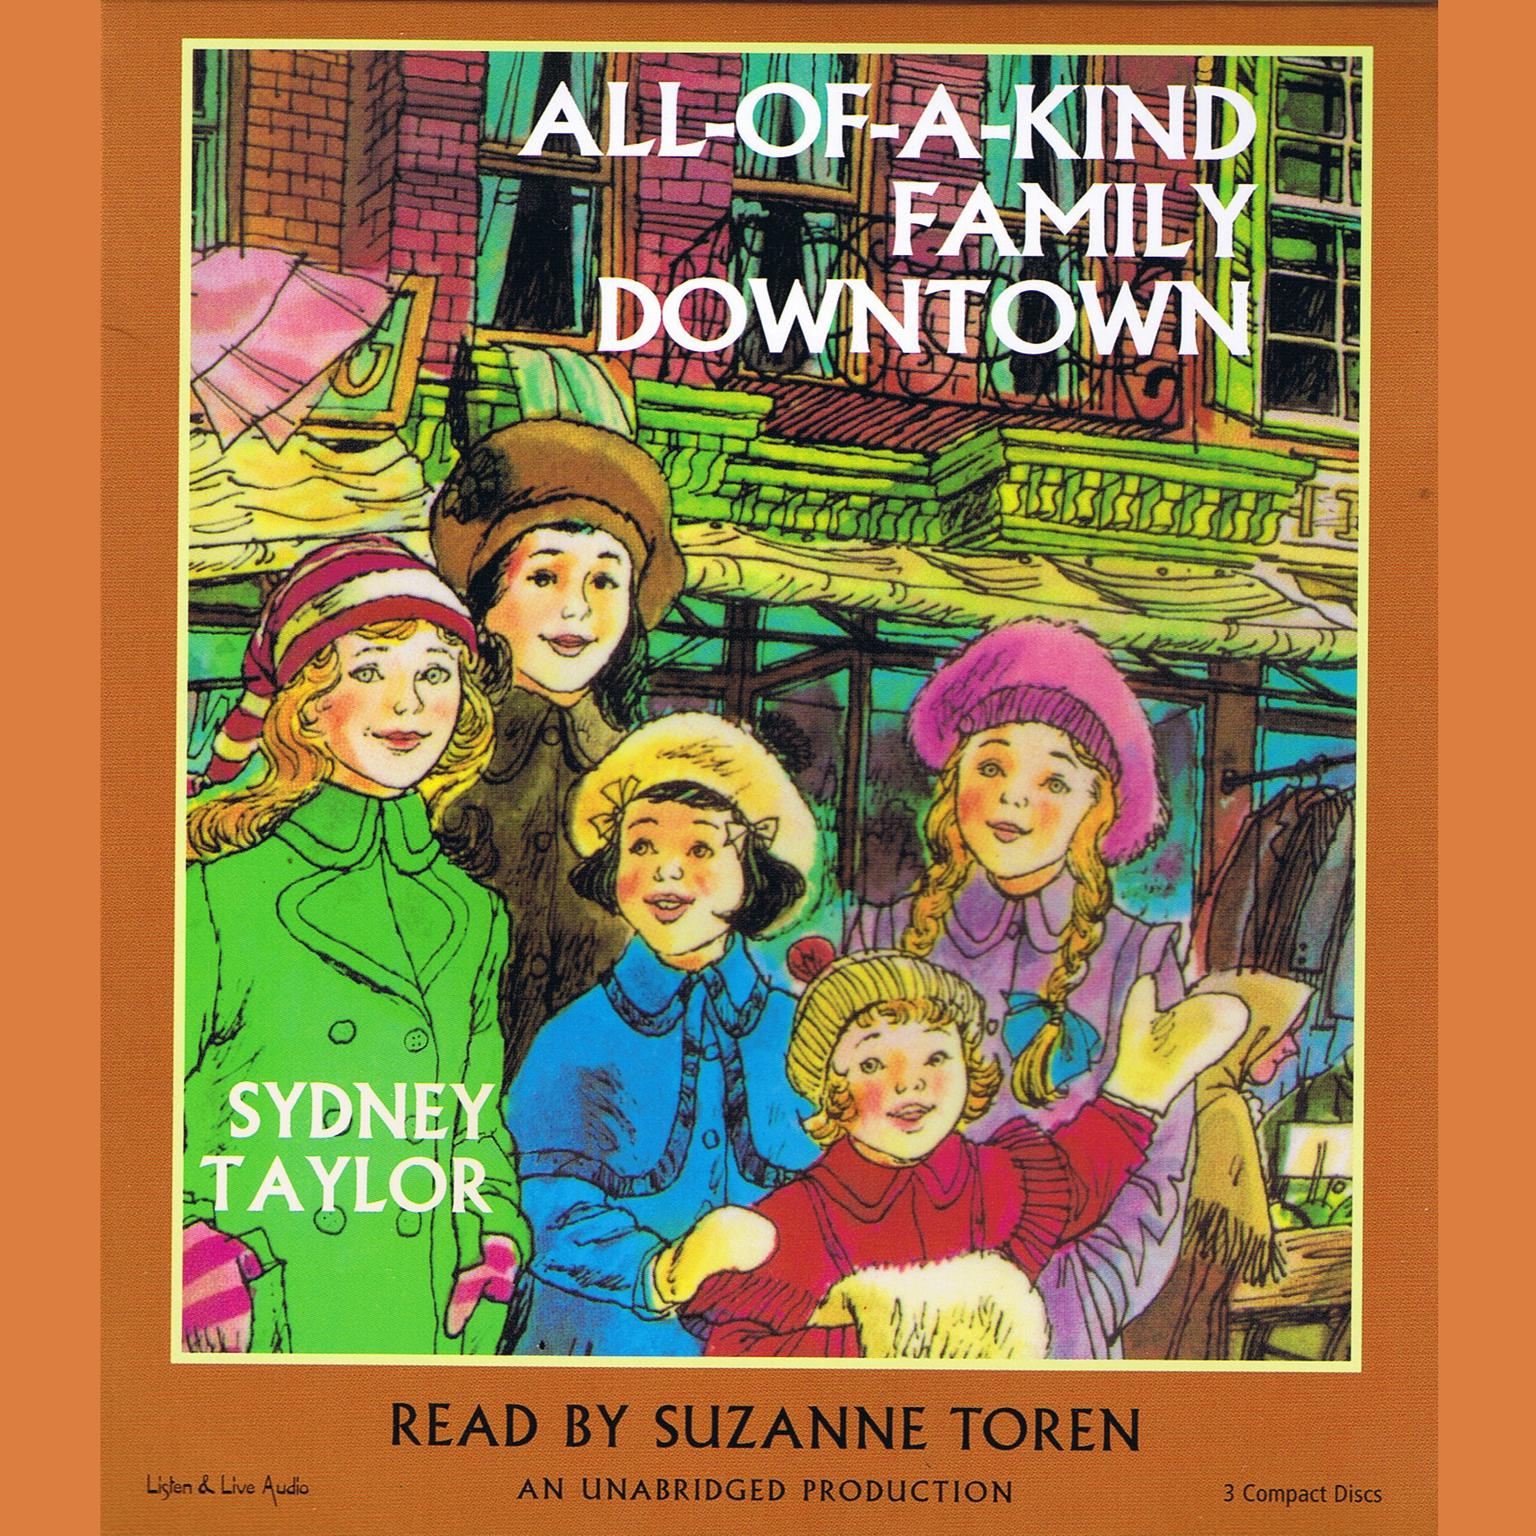 All-of-a-Kind Family Downtown Audiobook, by Sydney Taylor